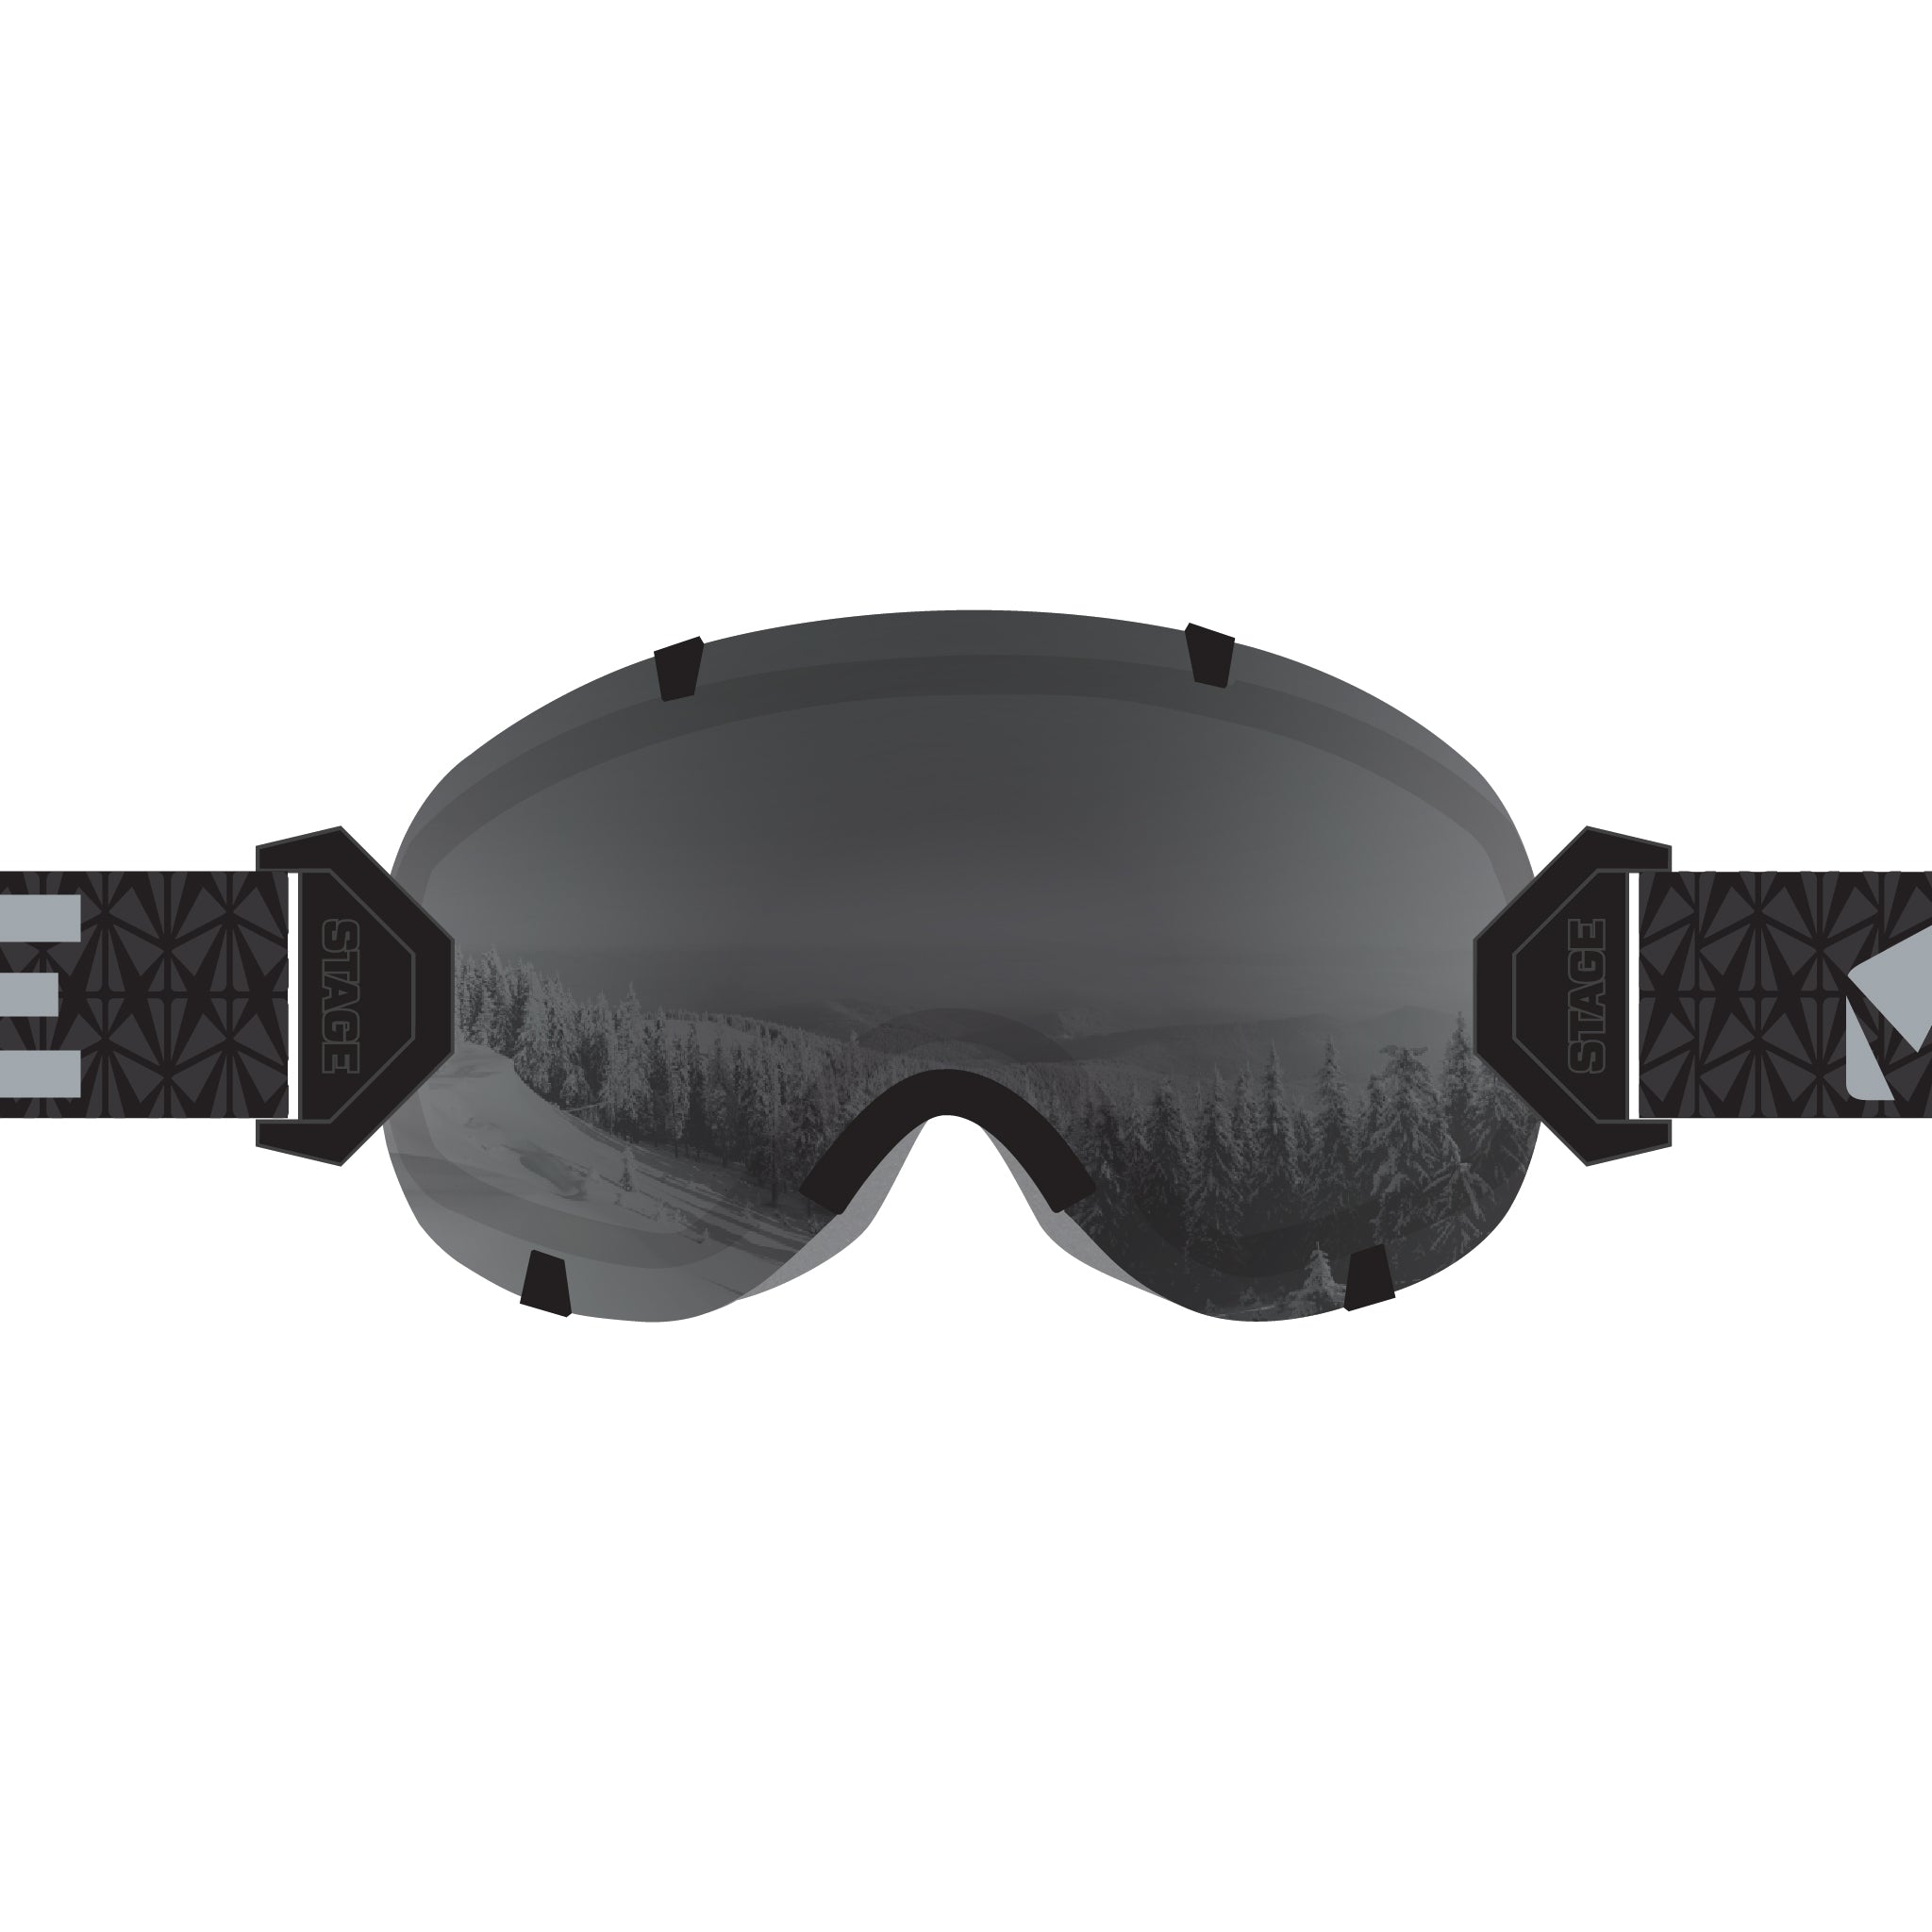 STAGE Stunt - Black Ski - Lens Strap Goggle Interchangeable and